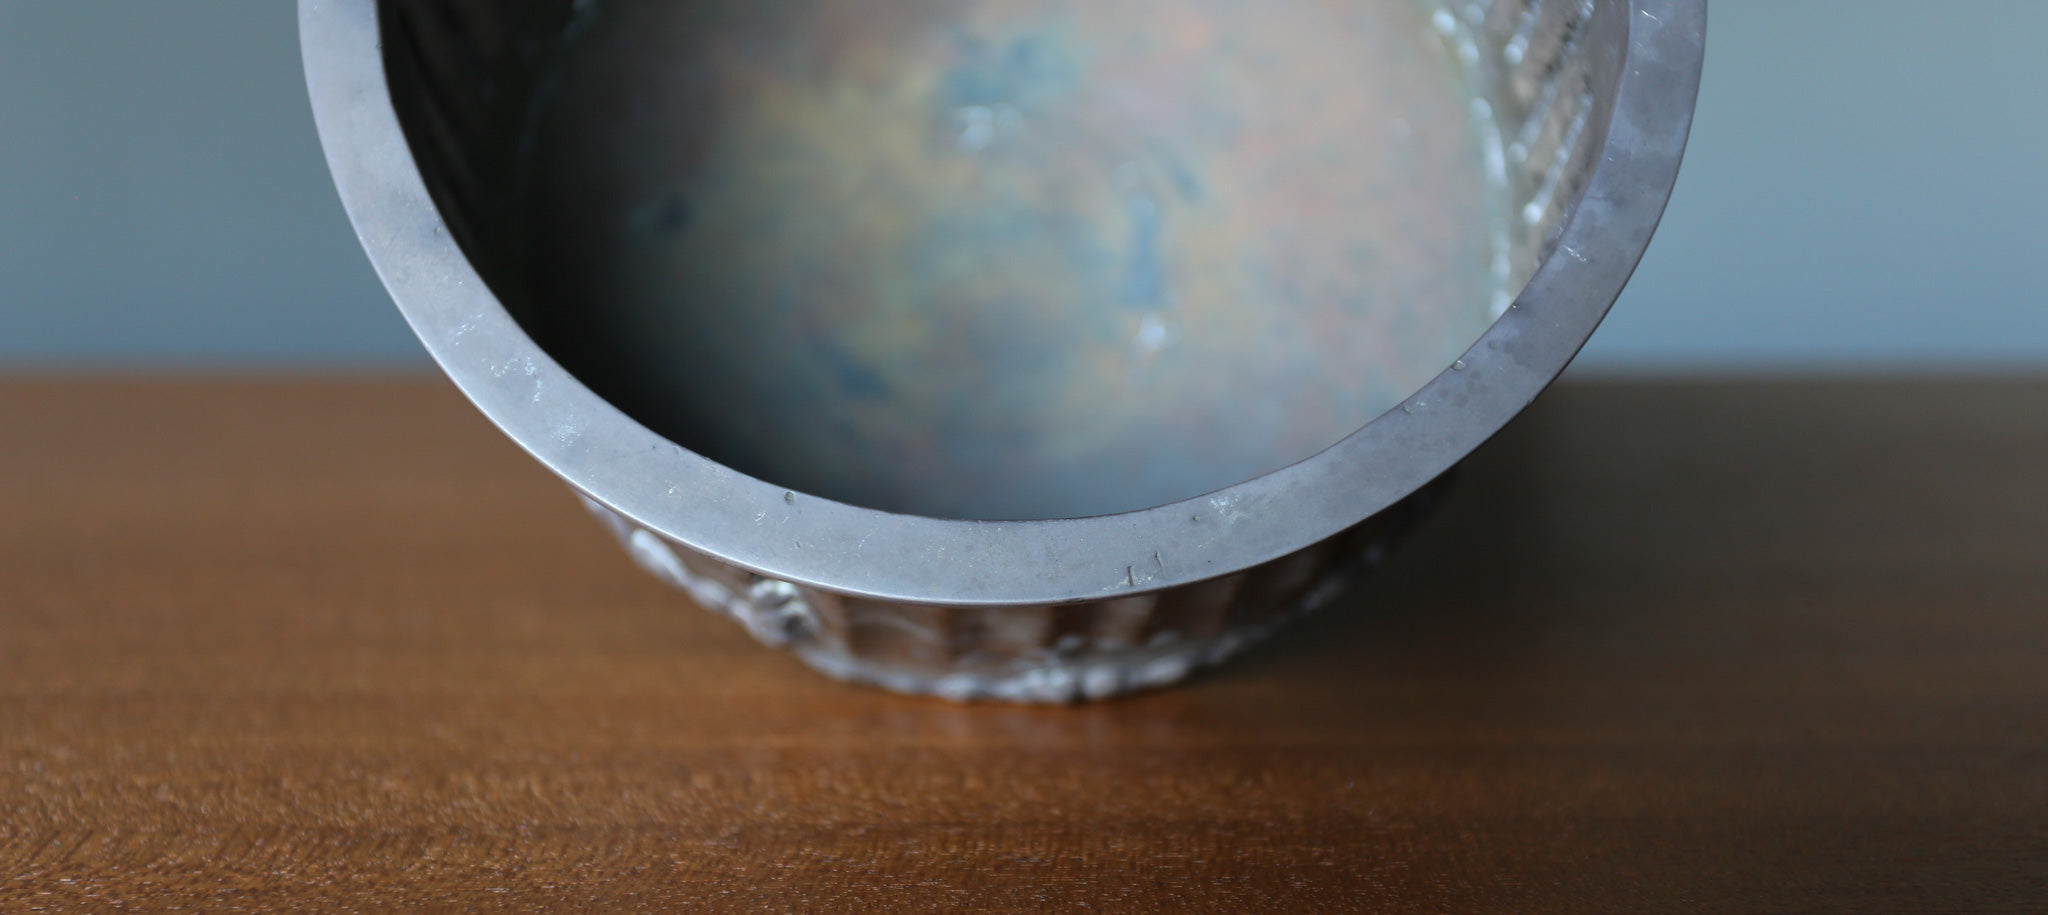 Dextra Frankel Welded 800 Silver Footed Bowl, California, c.1970